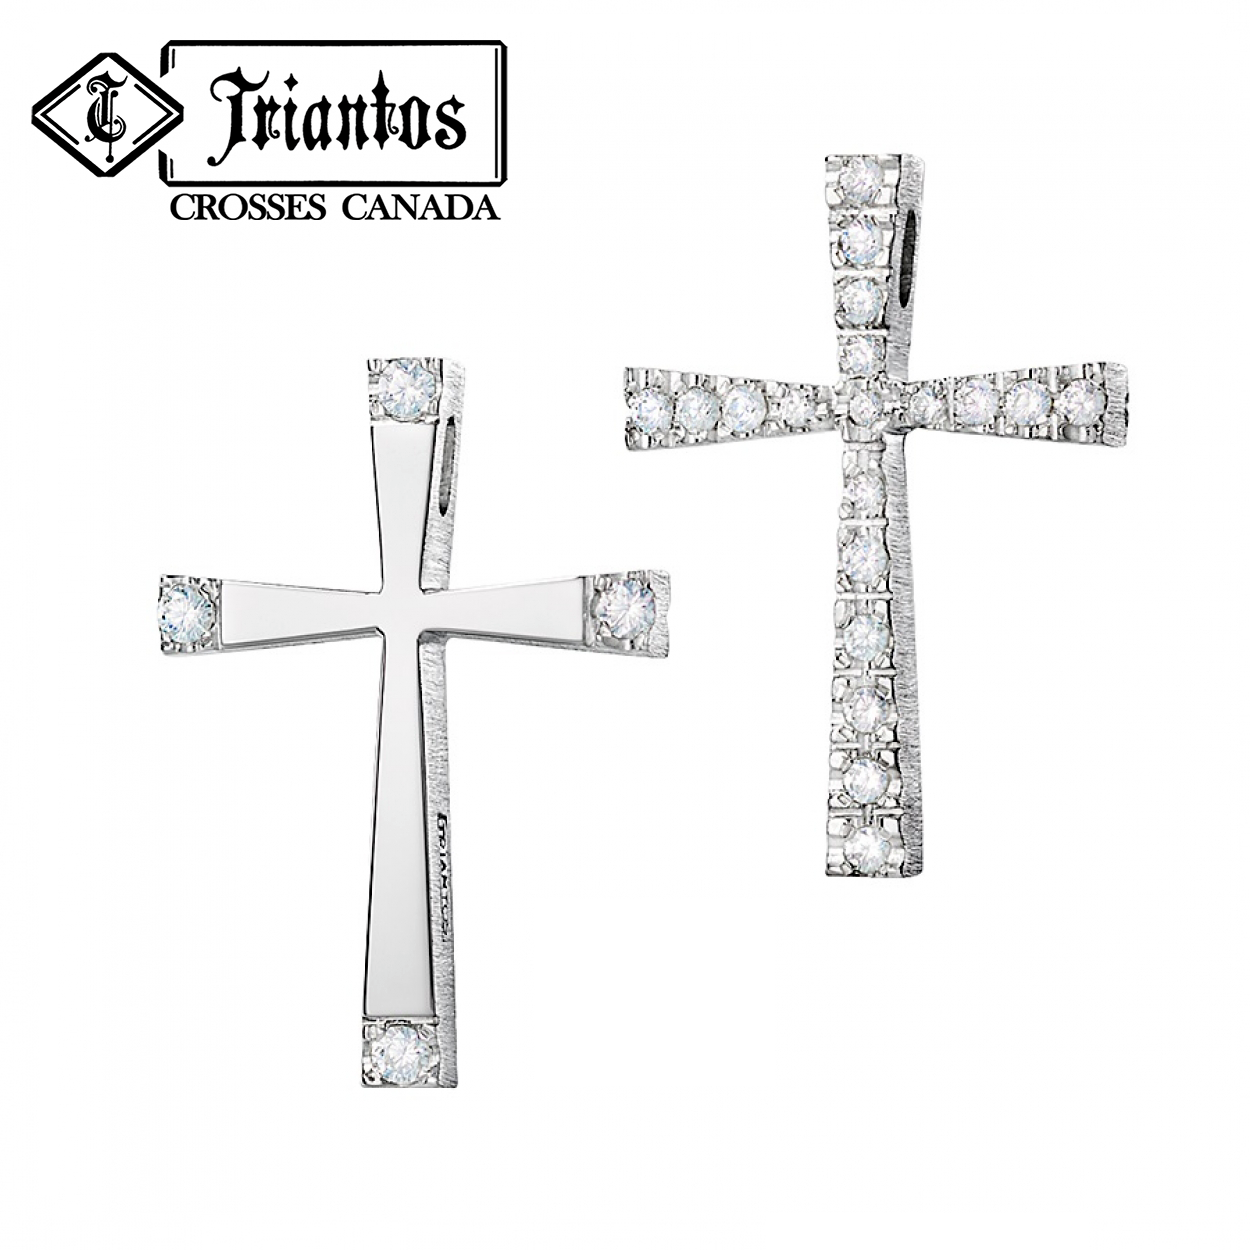 A delicate 14k gold cross pendant necklace adorned with sparkling diamond-shaped precious stones, symbolizing faith and elegance when worn